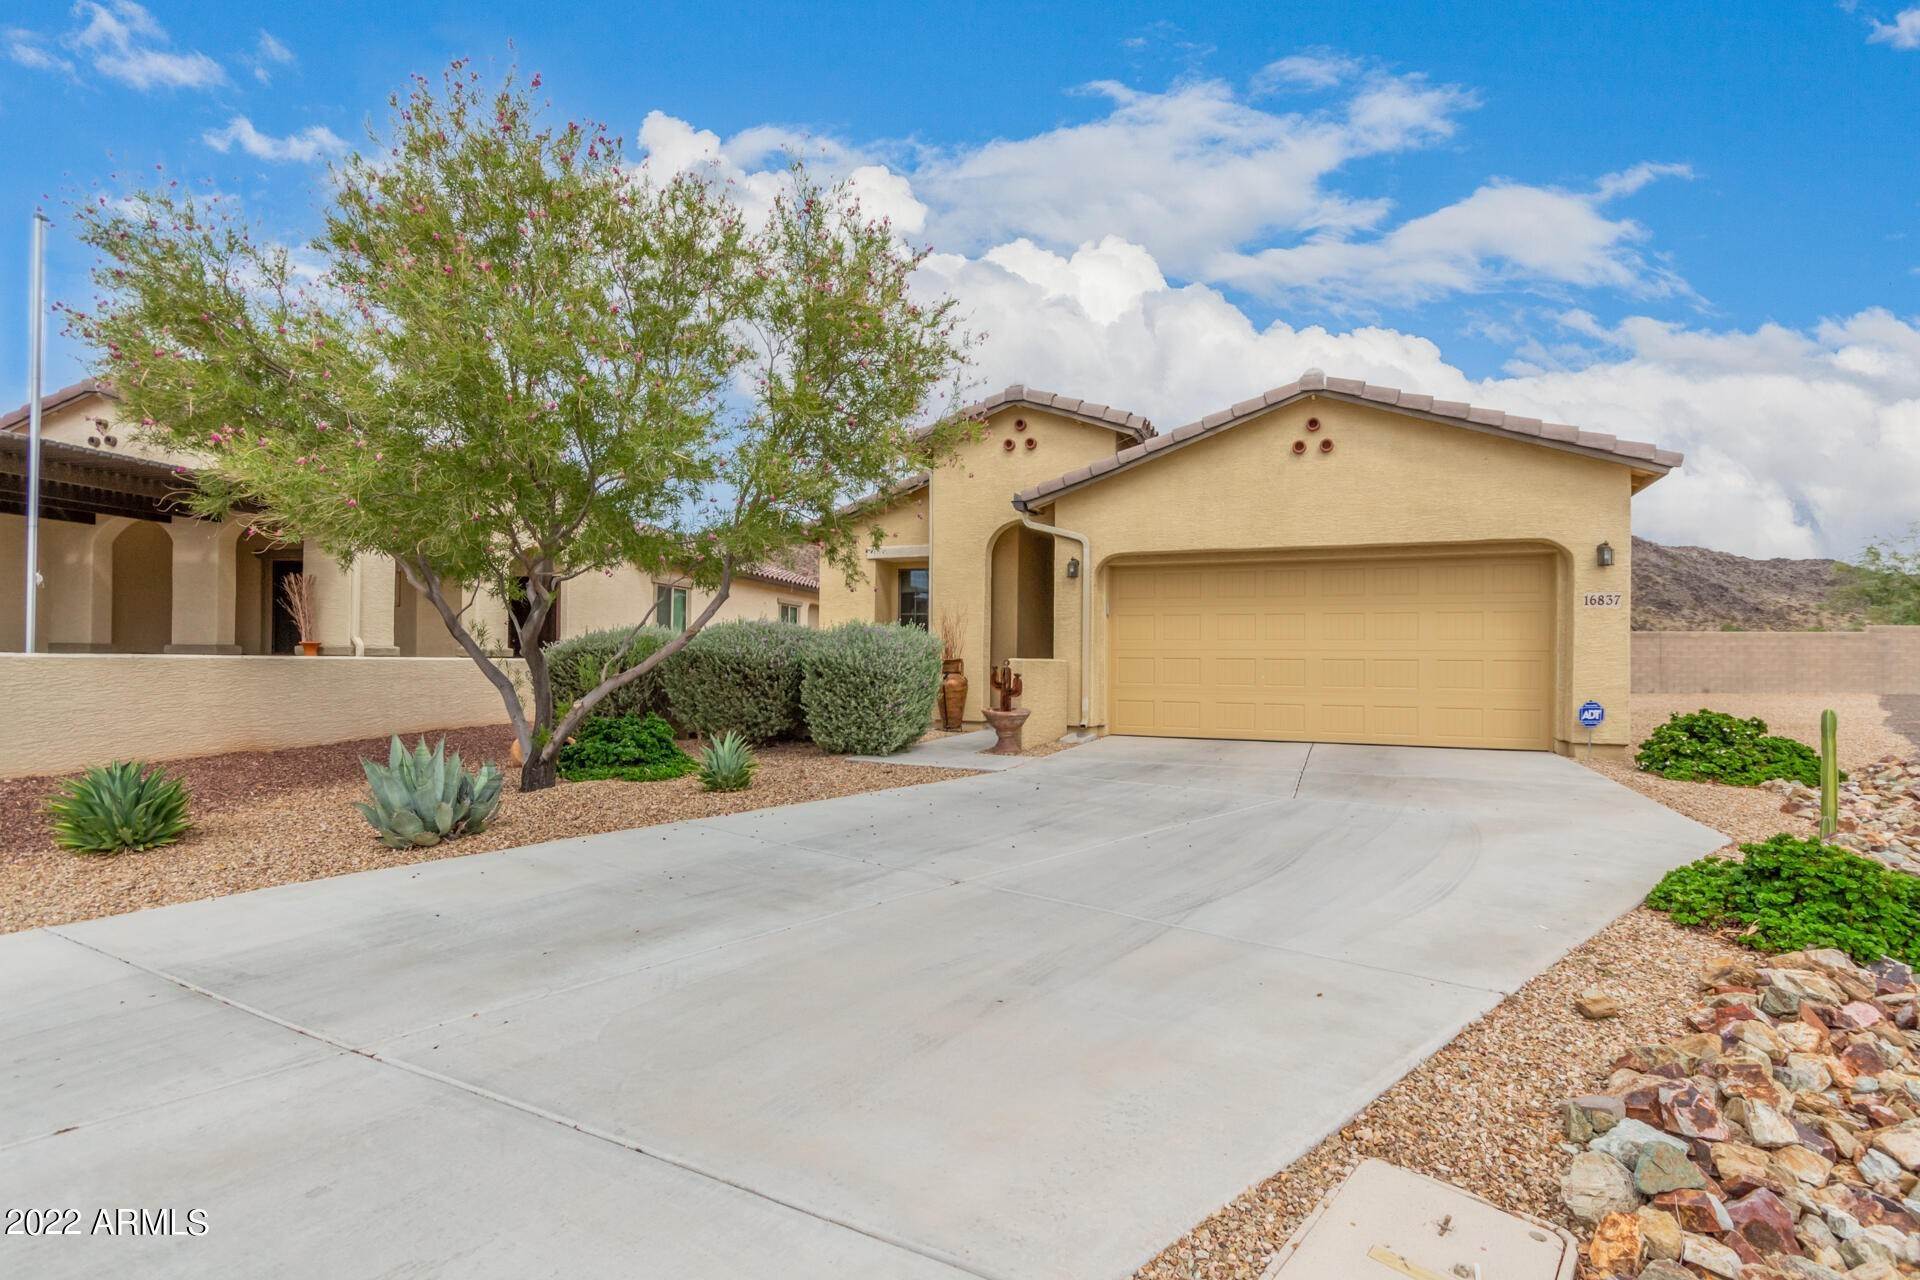 17. Single Family for Sale at Goodyear, AZ 85338